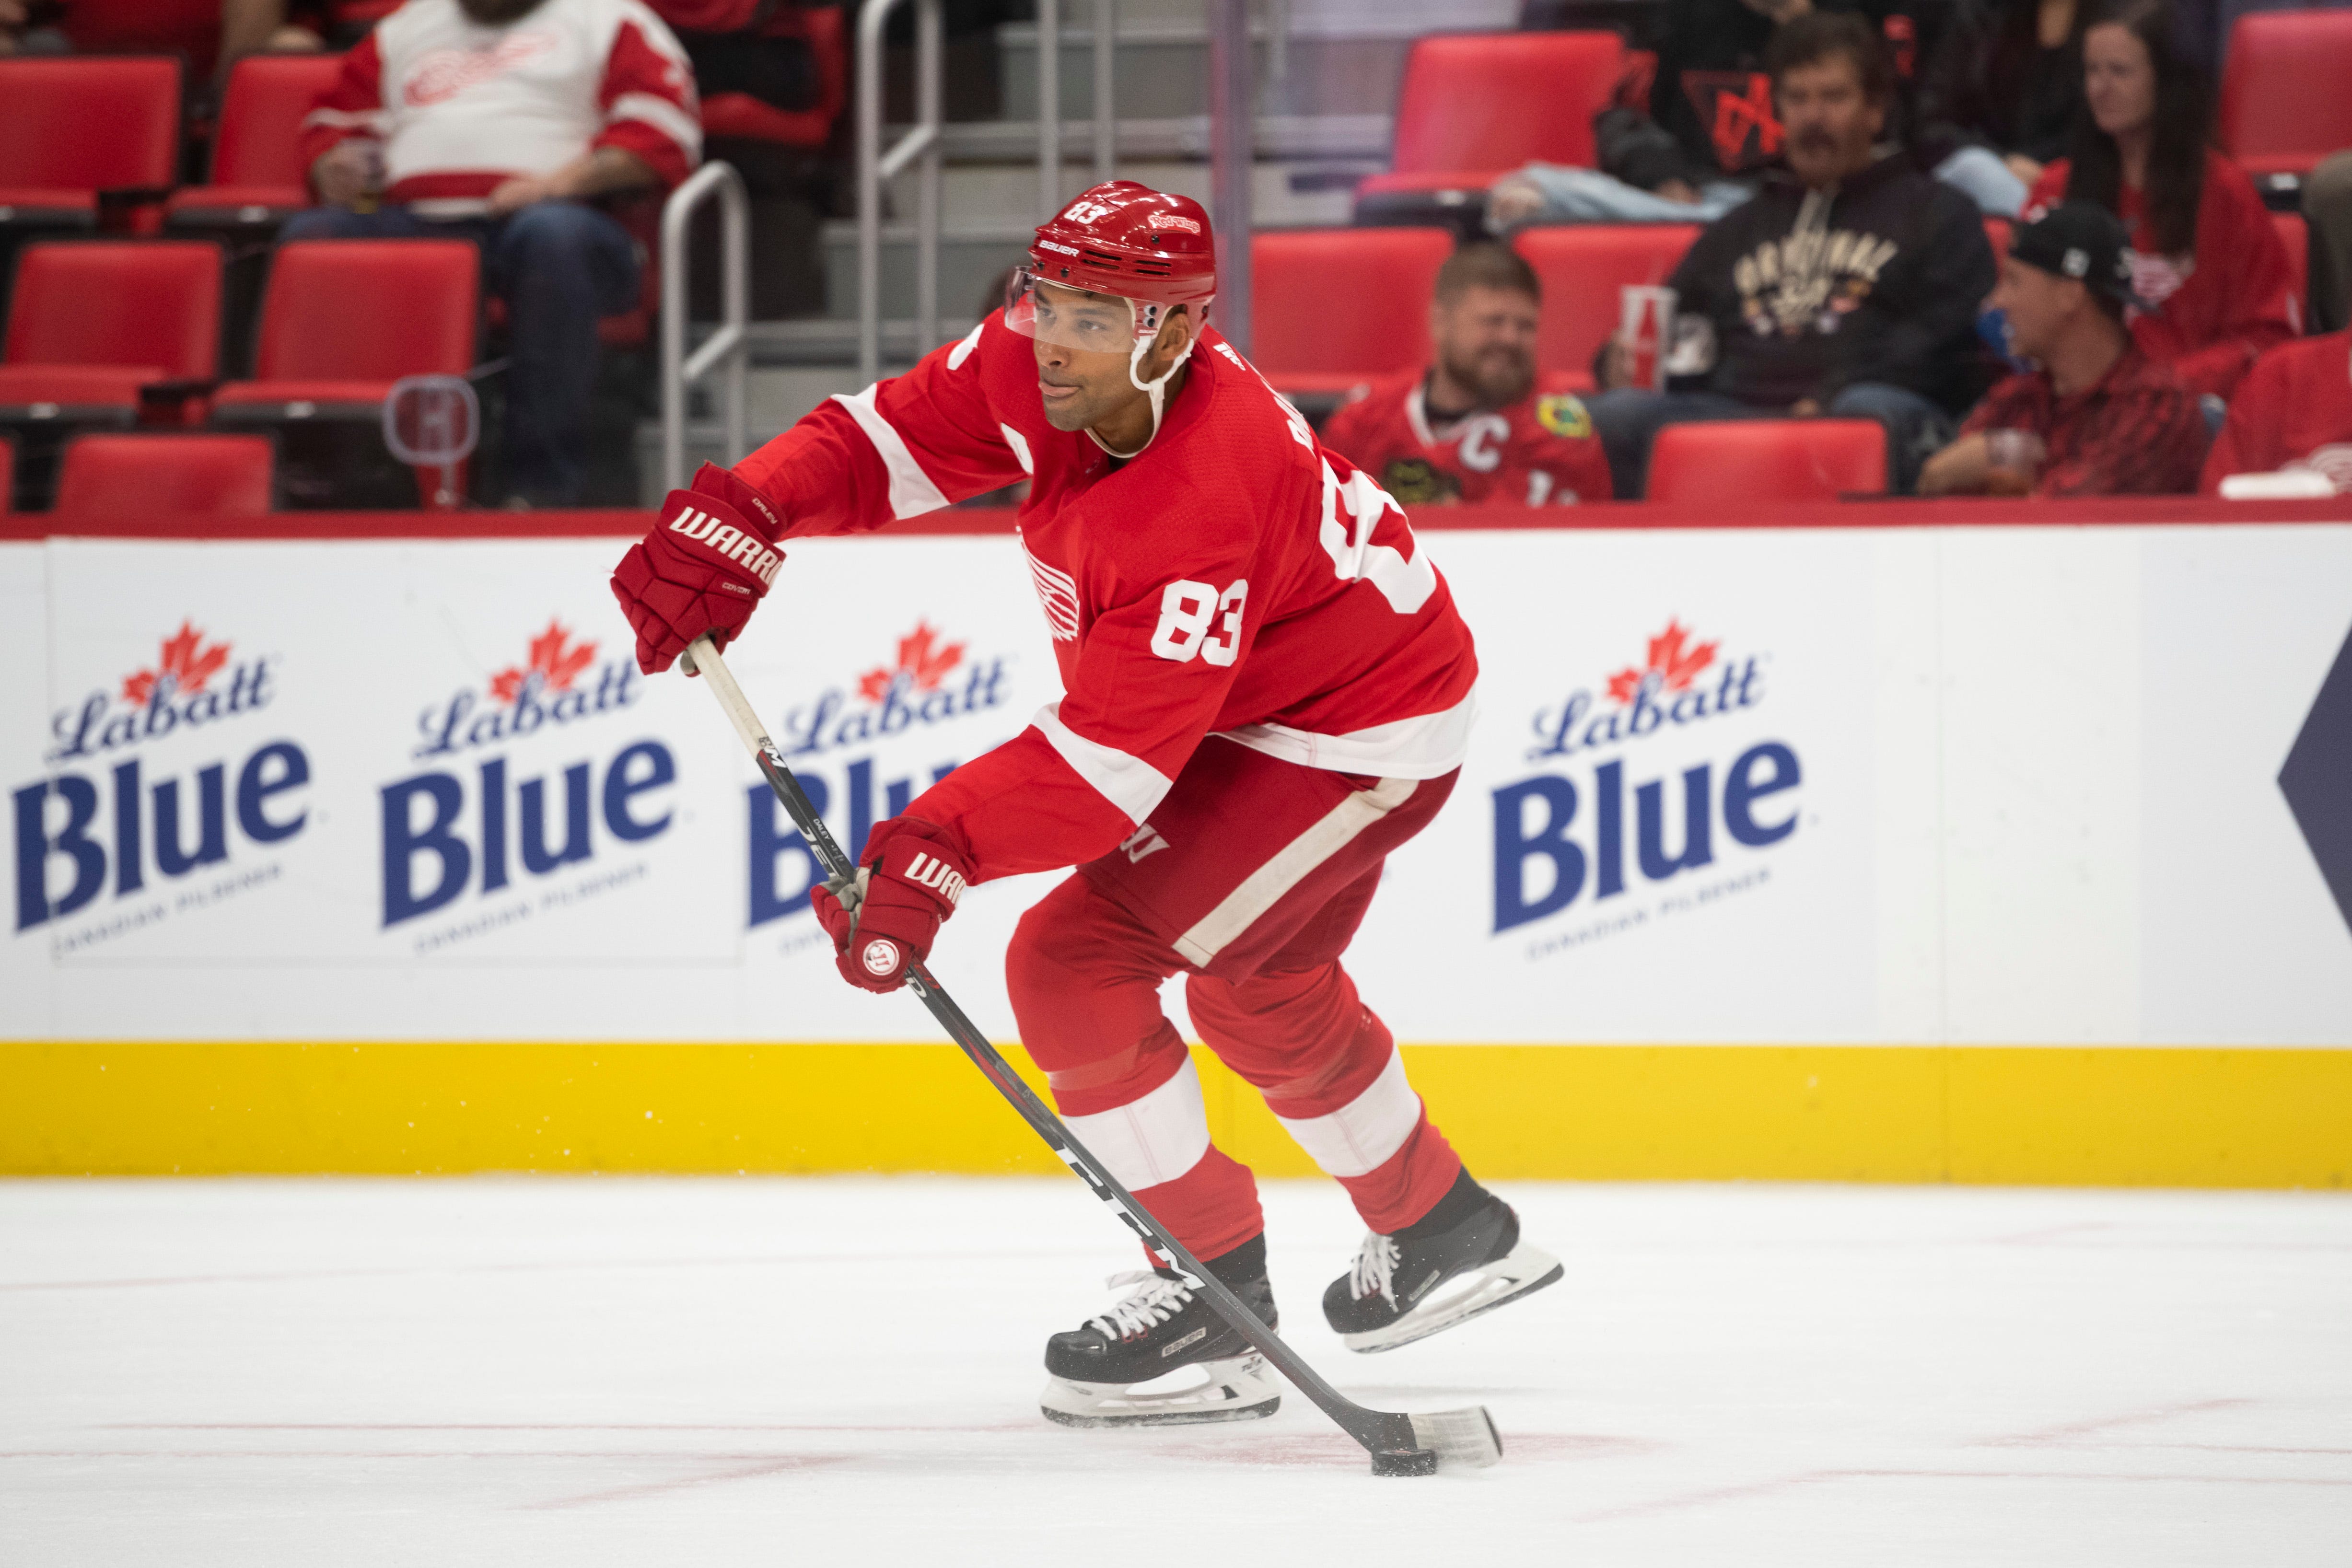 TREVOR DALEY: AGE: 35 (Oct. 9). HT: 5-11. WT: 195. STATS: 77 games, 9 goals, 7 assists, 16 points. ANALYSIS: Daley is a calming, veteran influence on a defense that keeps getting younger. He was injured during most of the preseason.